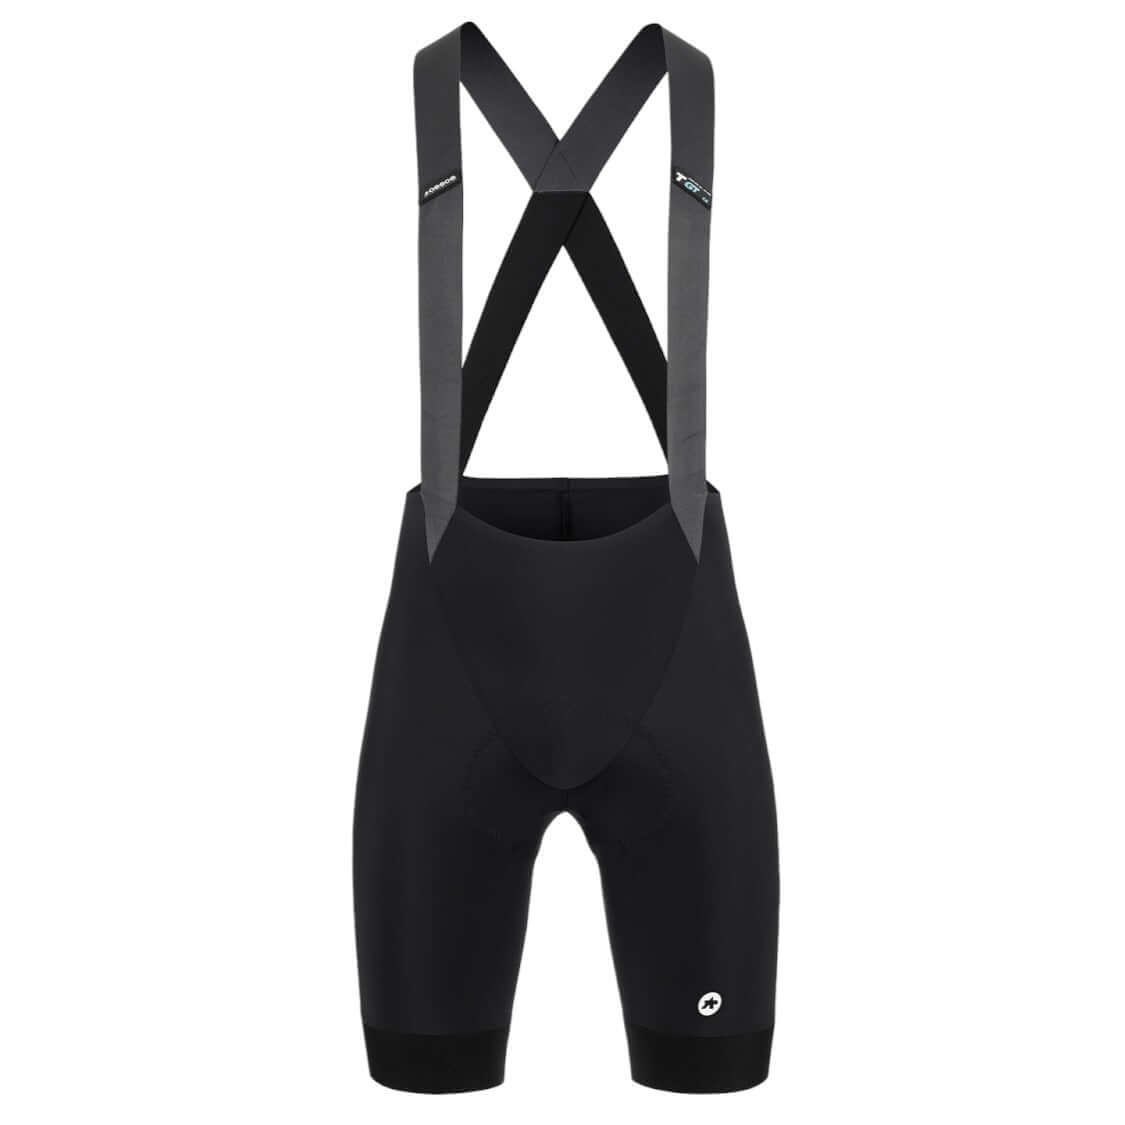 Assos of Switzerland Mille GT Half Shorts C2 | Strictly Bicycles